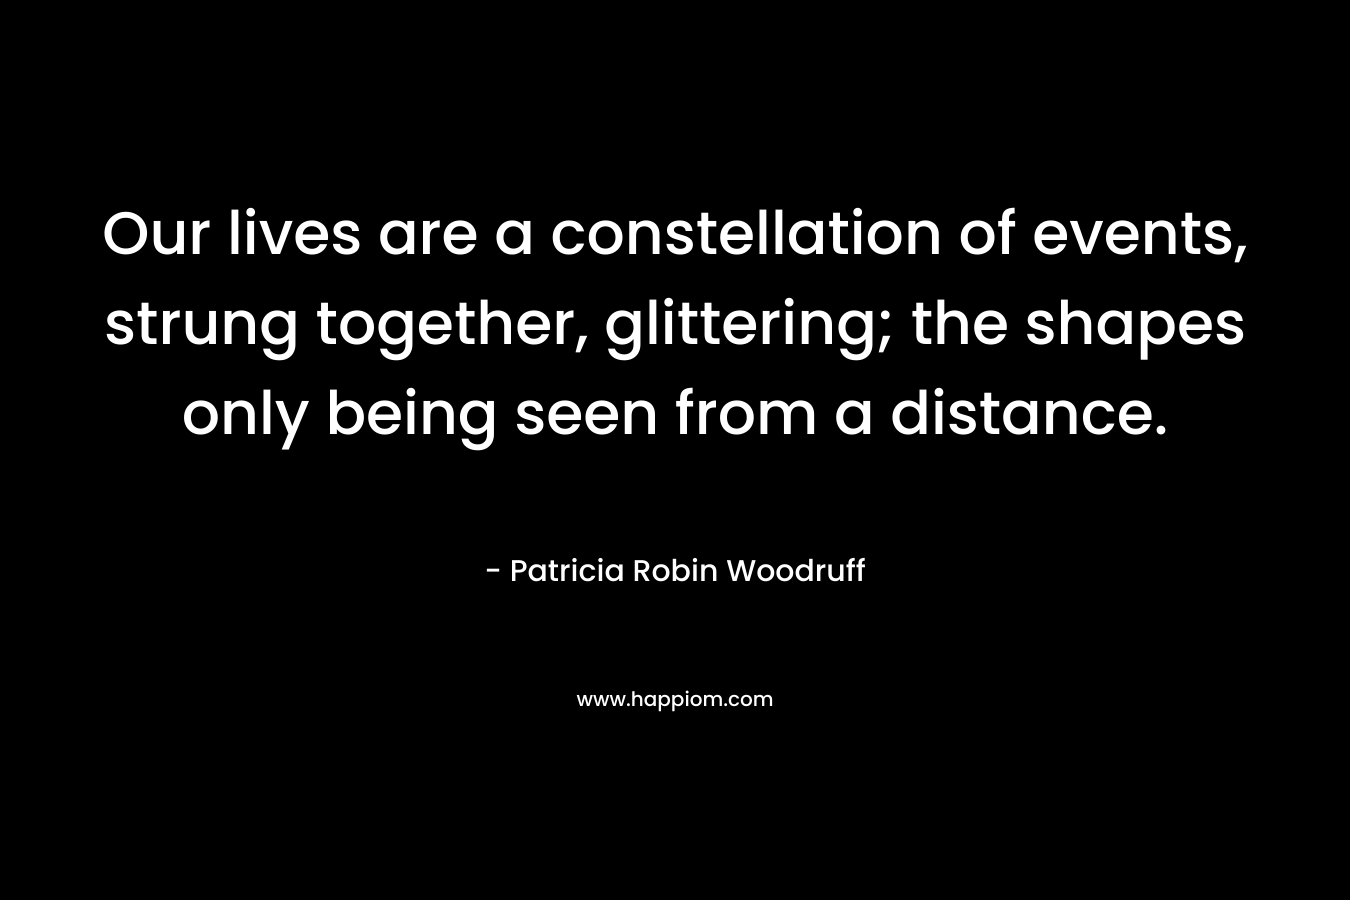 Our lives are a constellation of events, strung together, glittering; the shapes only being seen from a distance.